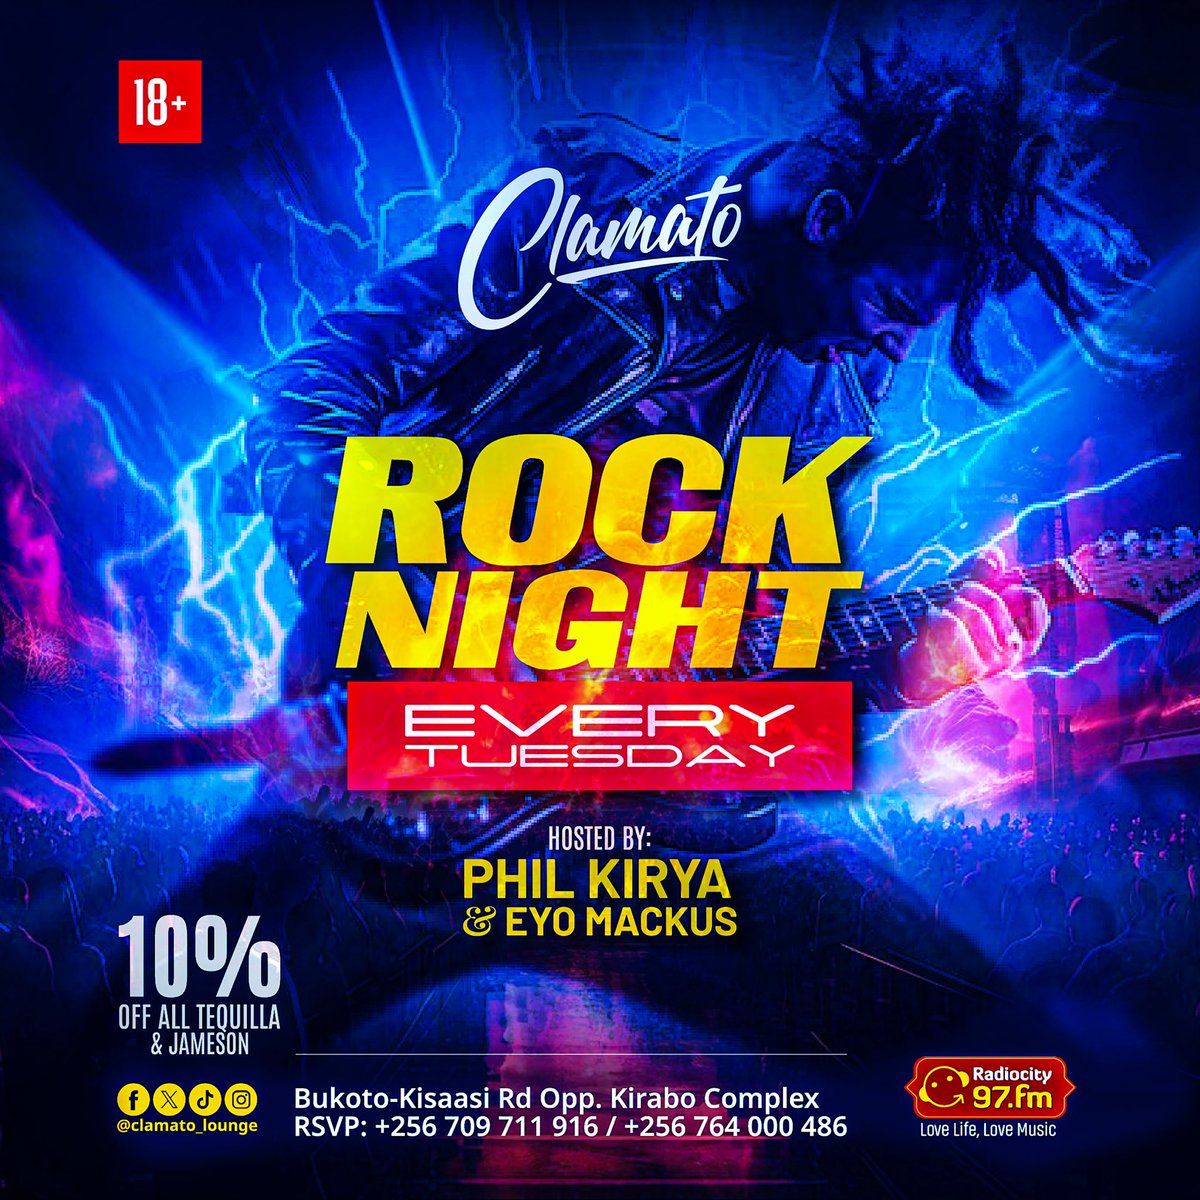 Tuesday evenings got better, it’s always a rock session at @clamato_lounge 
Hosted by Phil Kirya and Eyo Mackus 
Enjoy the 10% off all tequila and Jameson 
#ClamatoRockTuesdays